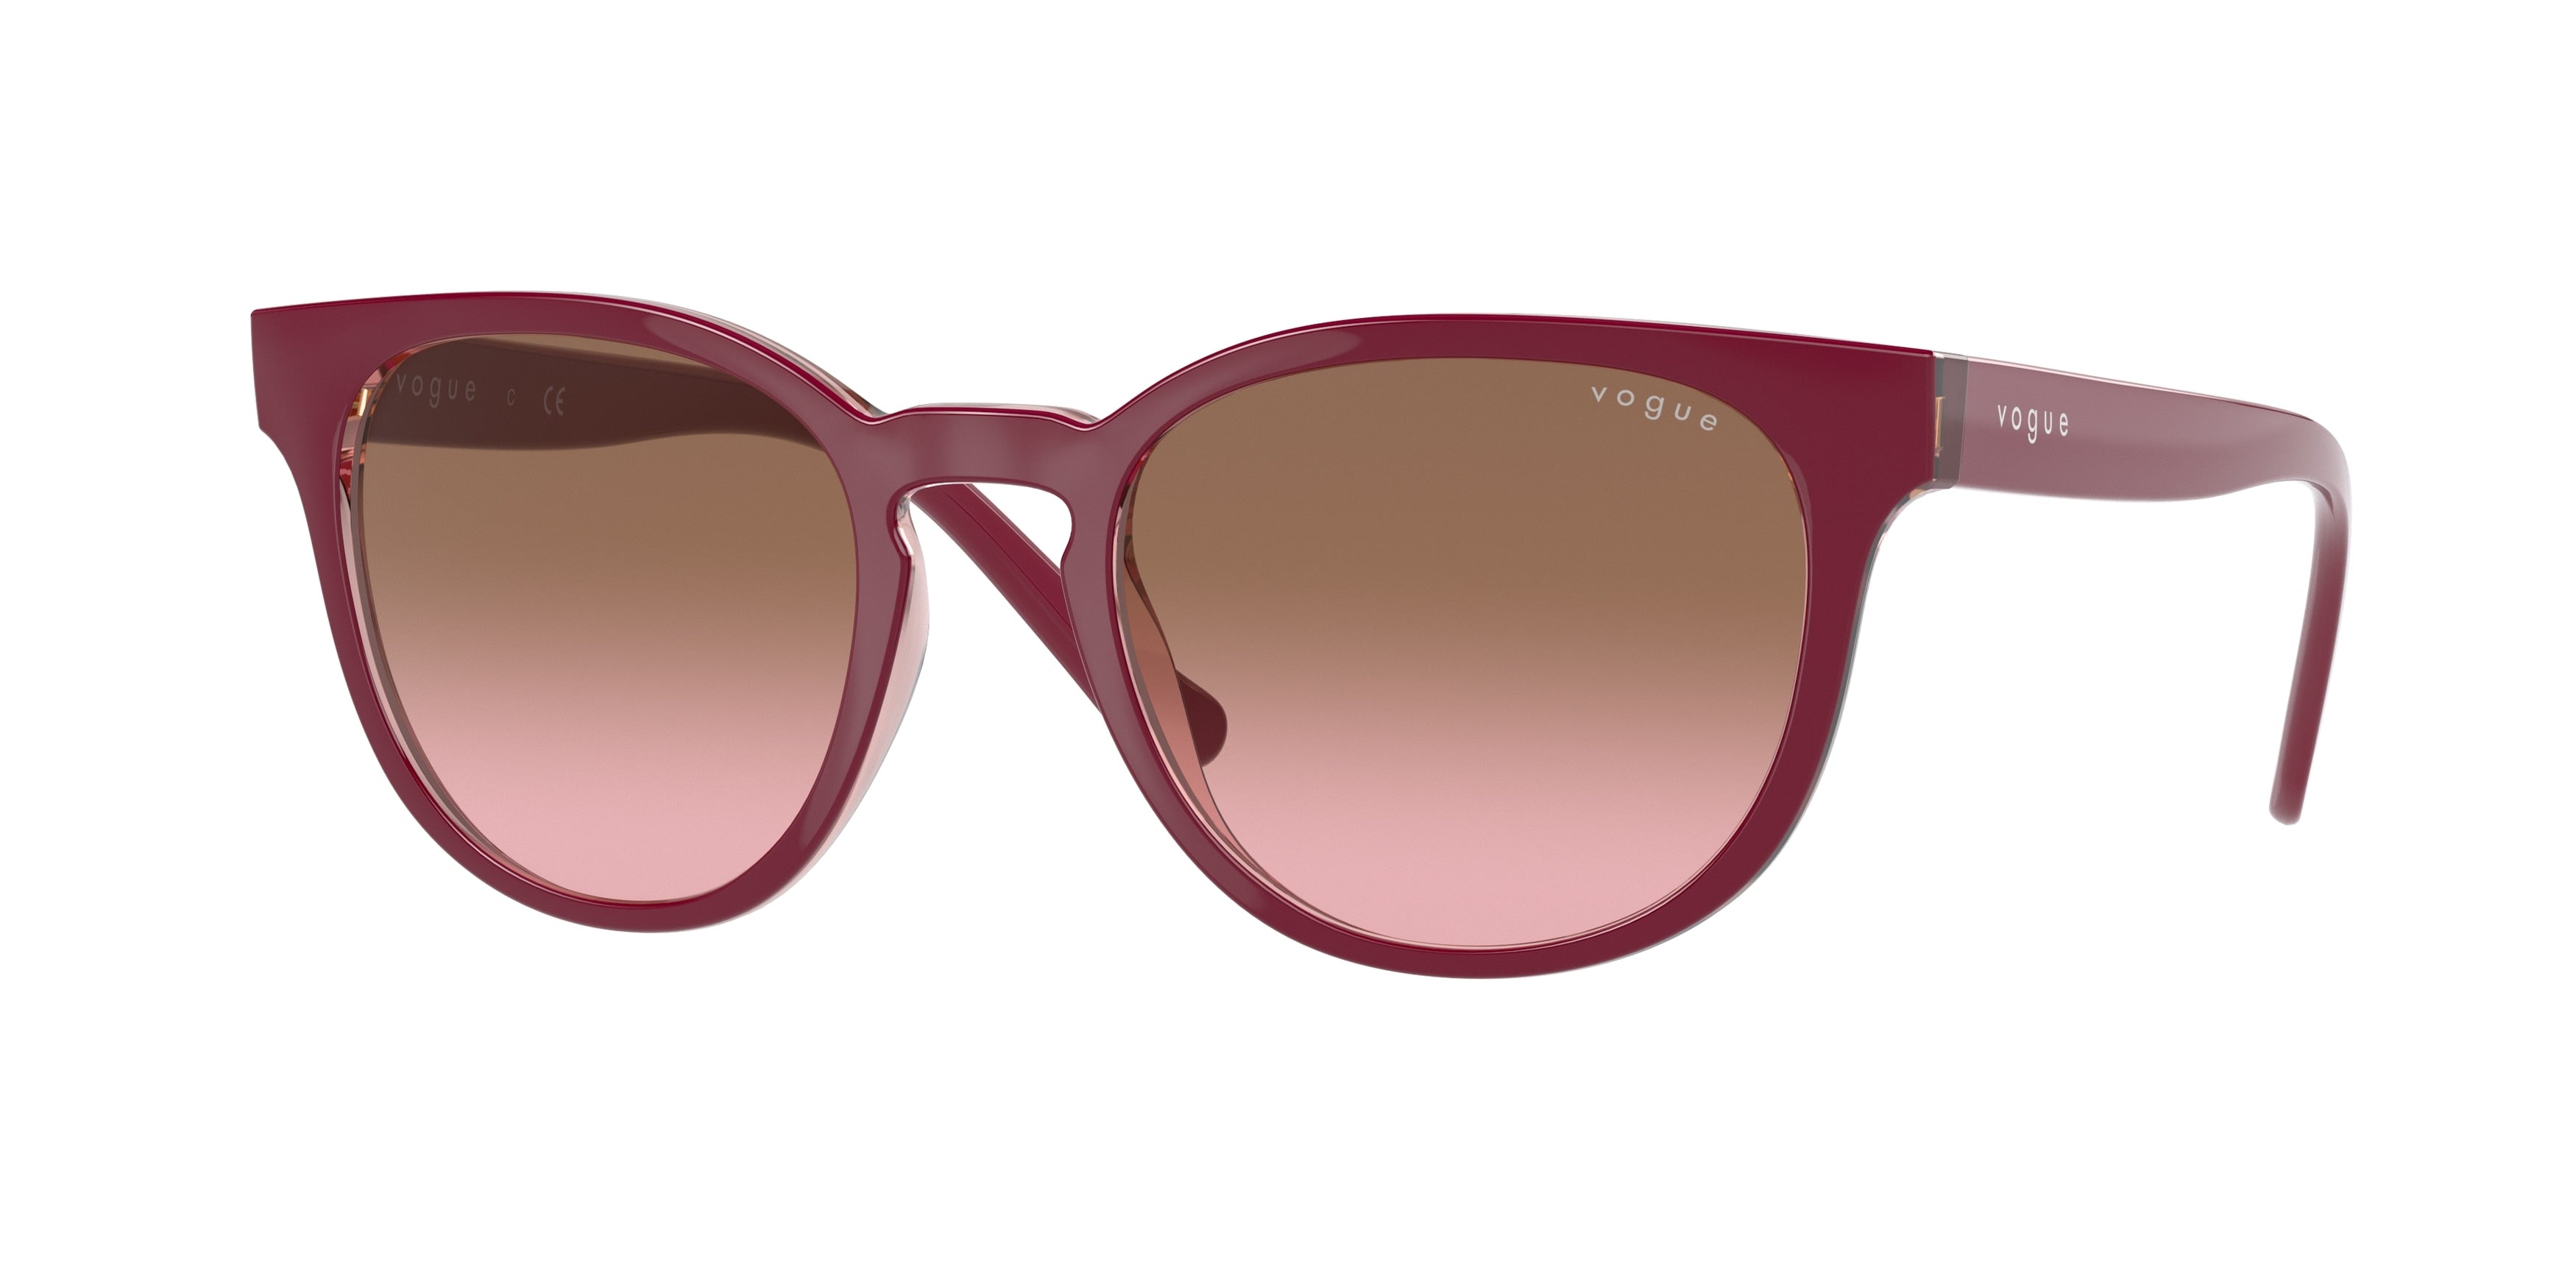 Vogue VO5271S Square Sunglasses  296014-Top Bordeaux/Flowers Red 53-140-20 - Color Map Red